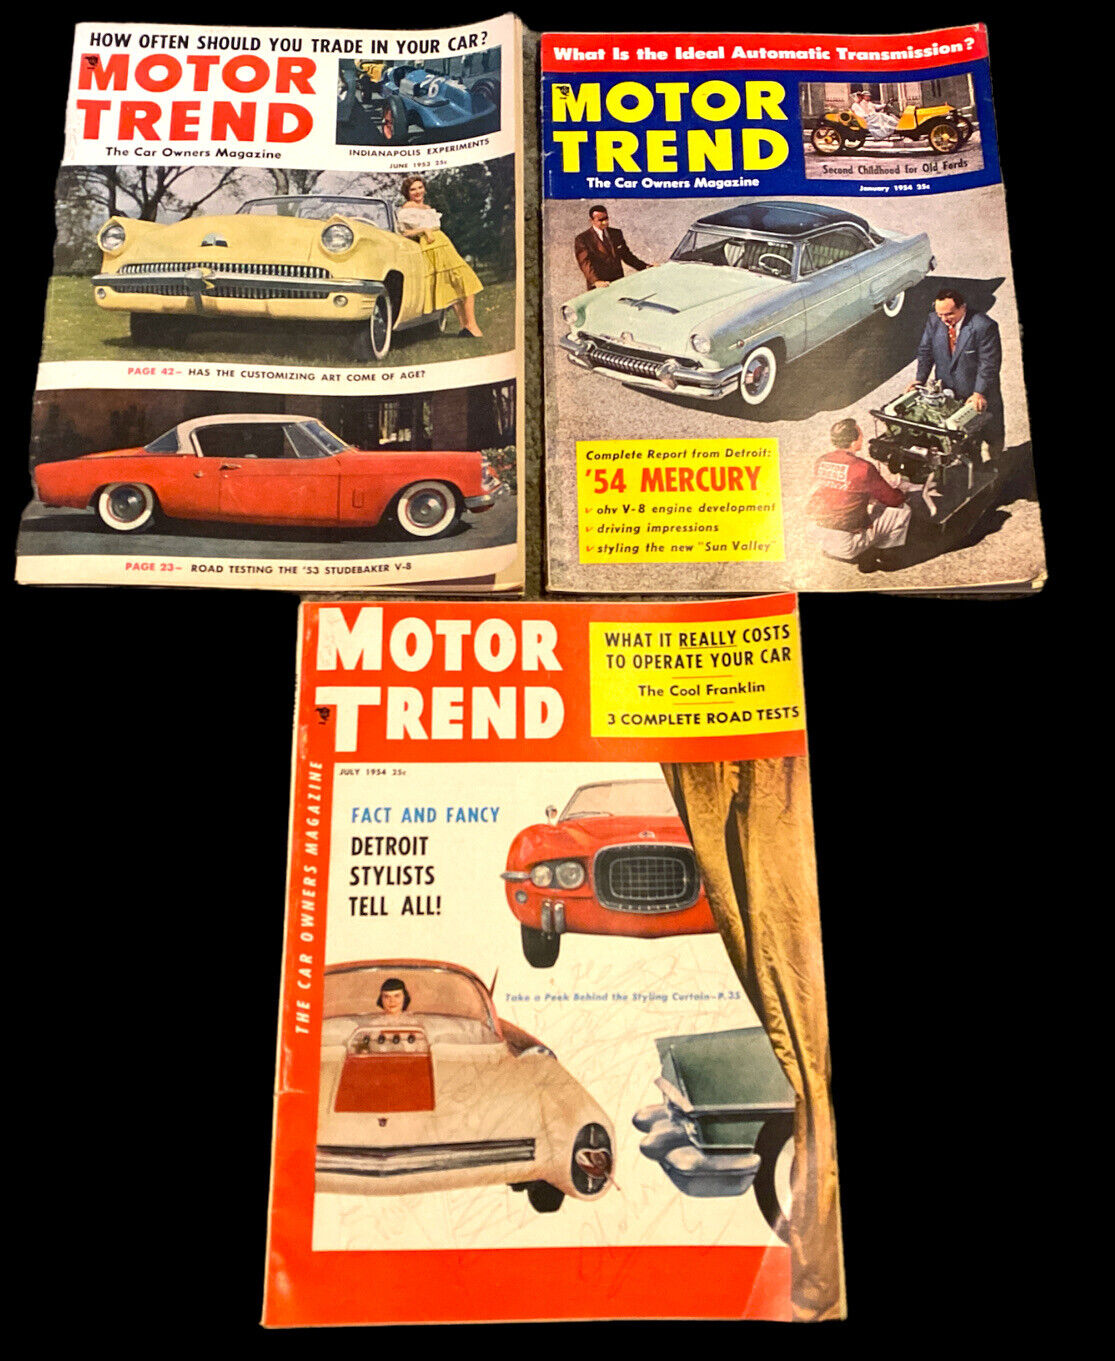 Motor Trend Magazine 1953 1954 Lot of 3 Vintage Car Issues Detroit Styling